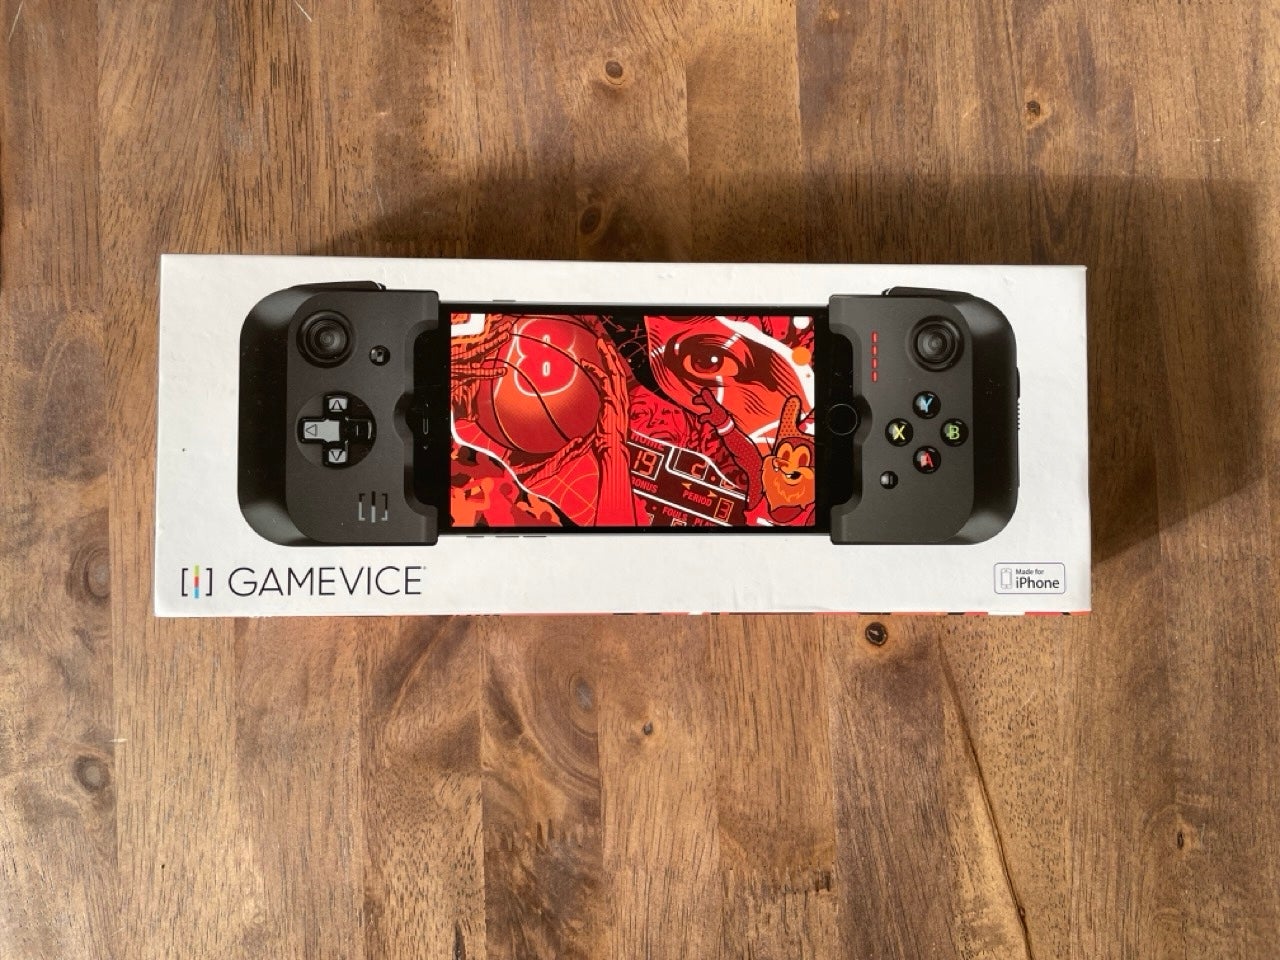 Controller, Anden konsol, Gamevice